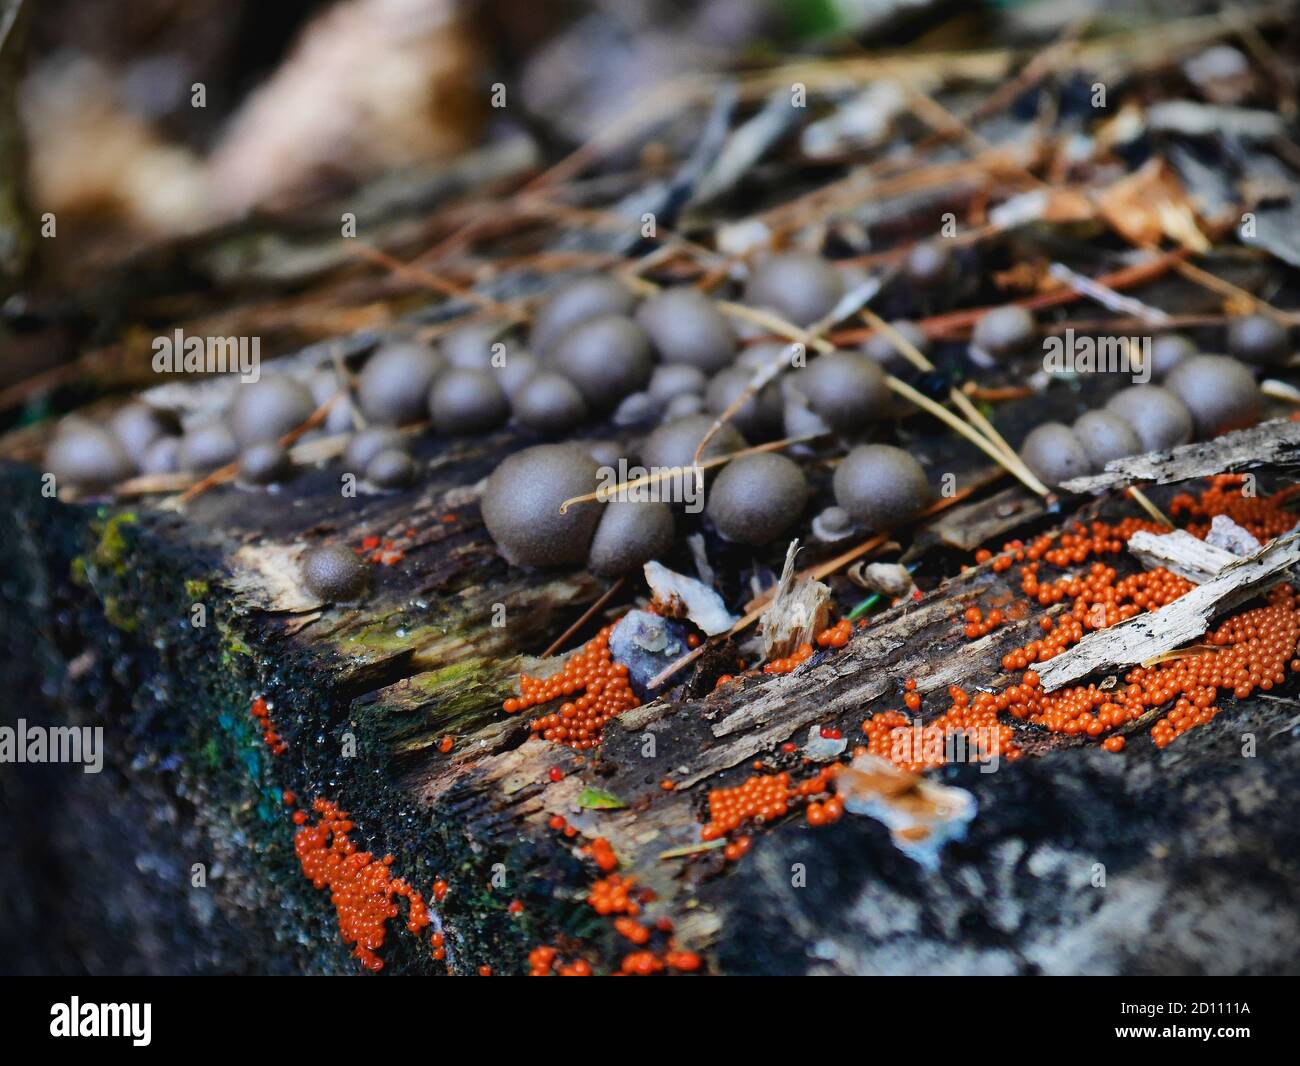 Young fruitbodies of the Hemitrichia genus, a slime mold, sharing a log with Lycogala epidendrum. Neither are considered fungi. Quebec, Canada. Stock Photo